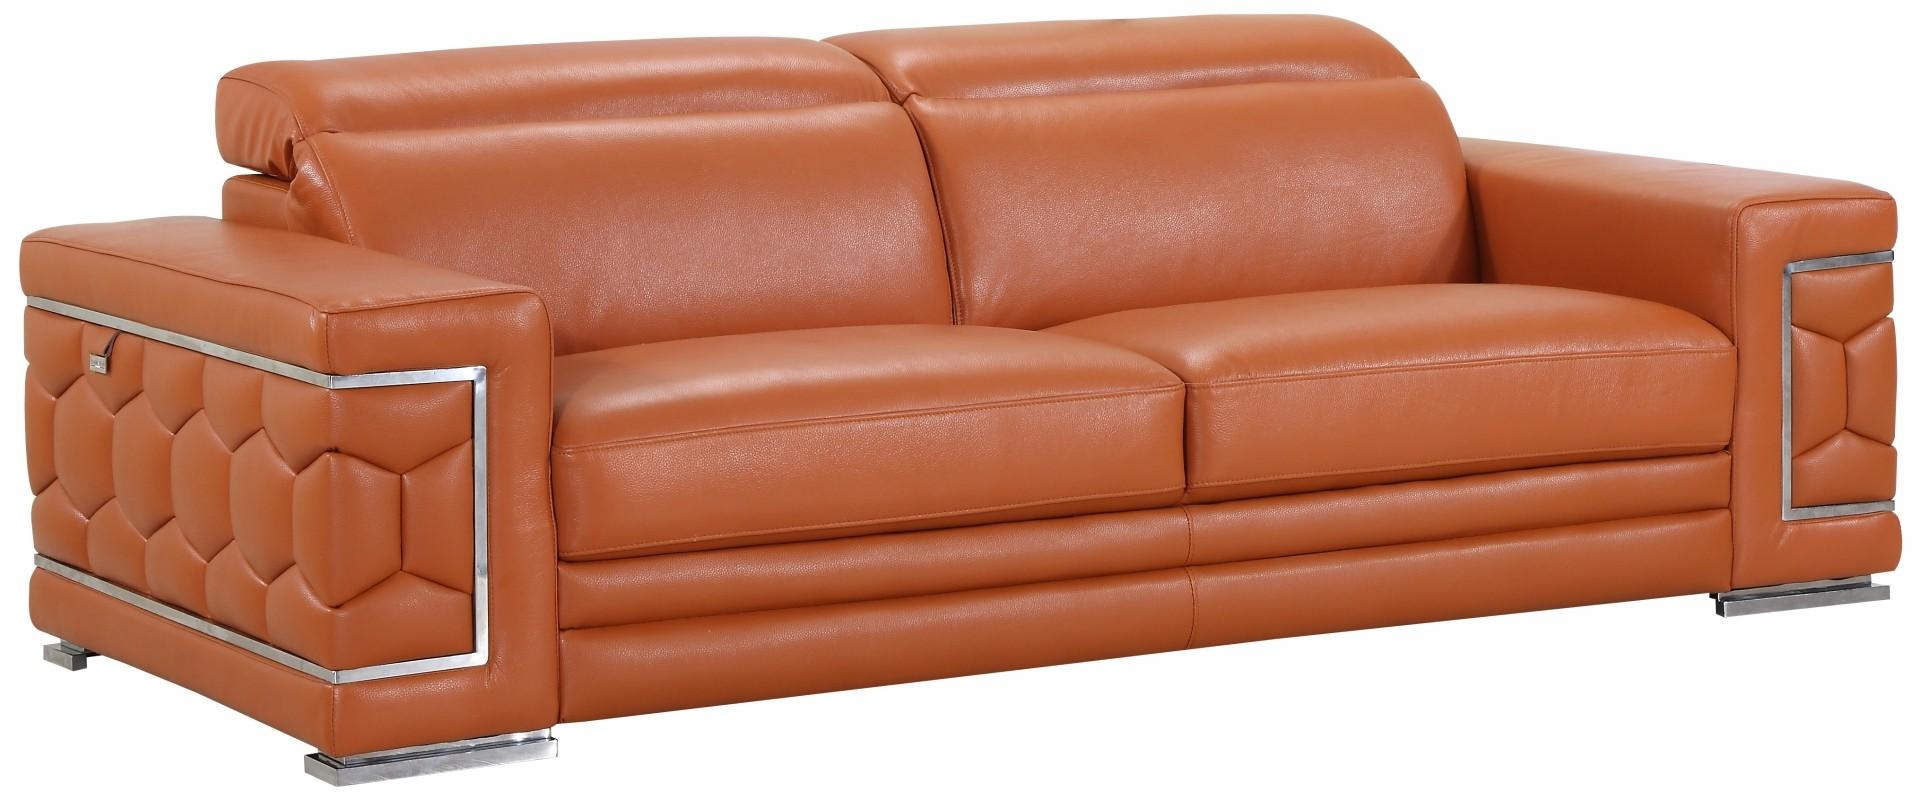 Contemporary Sofa 692 692-CAMEL-S in Camel Genuine Leather